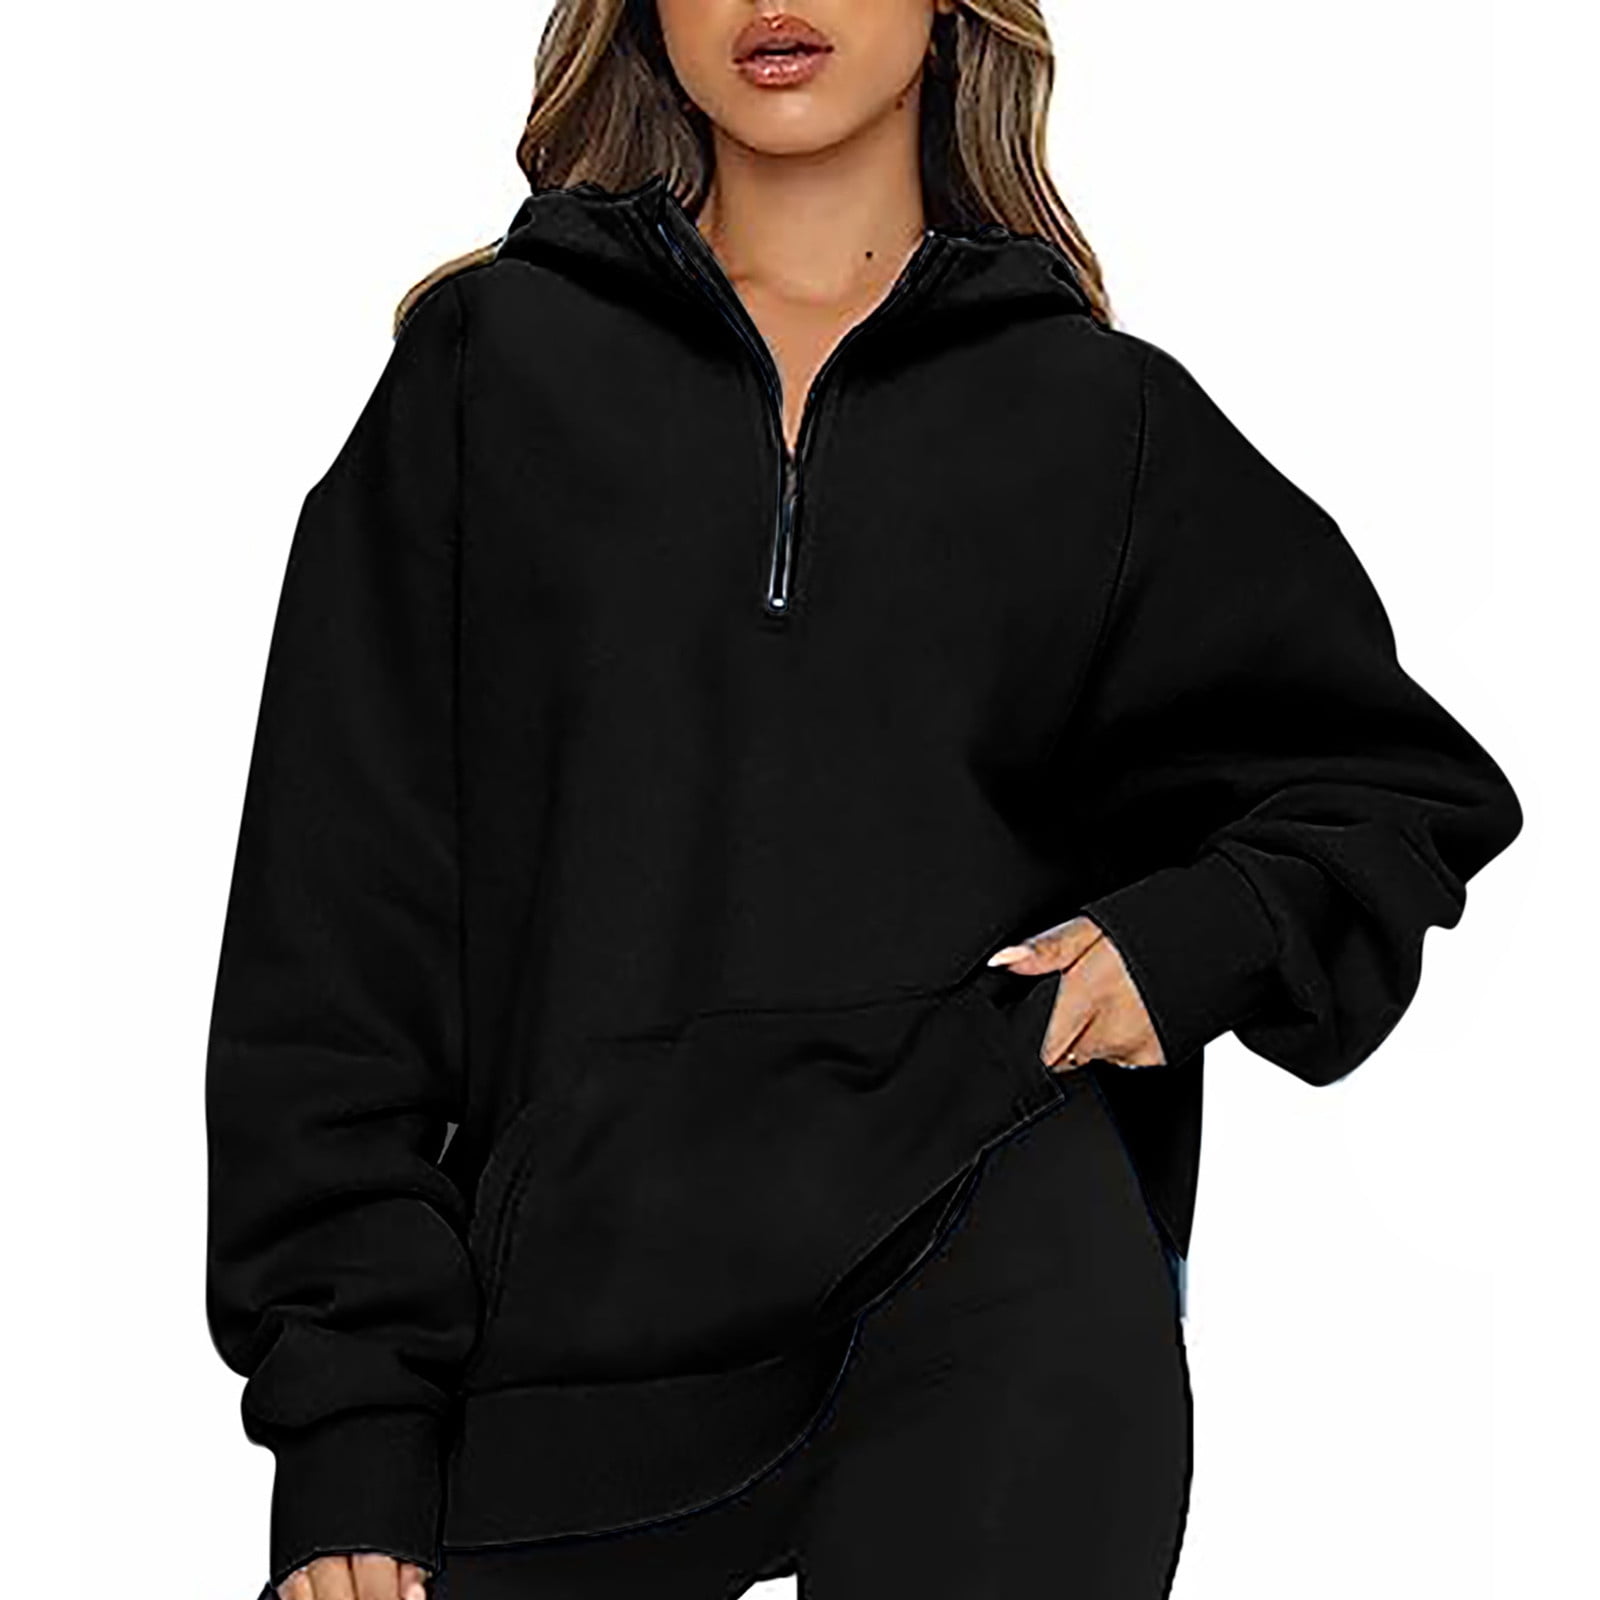 Womens Oversized Hoodies 1/4 Zip High Neck Sweatshirts with Pocket Long  Sleeve Cozy Plain Pullover Sweater Tops (3X-Large, Black)